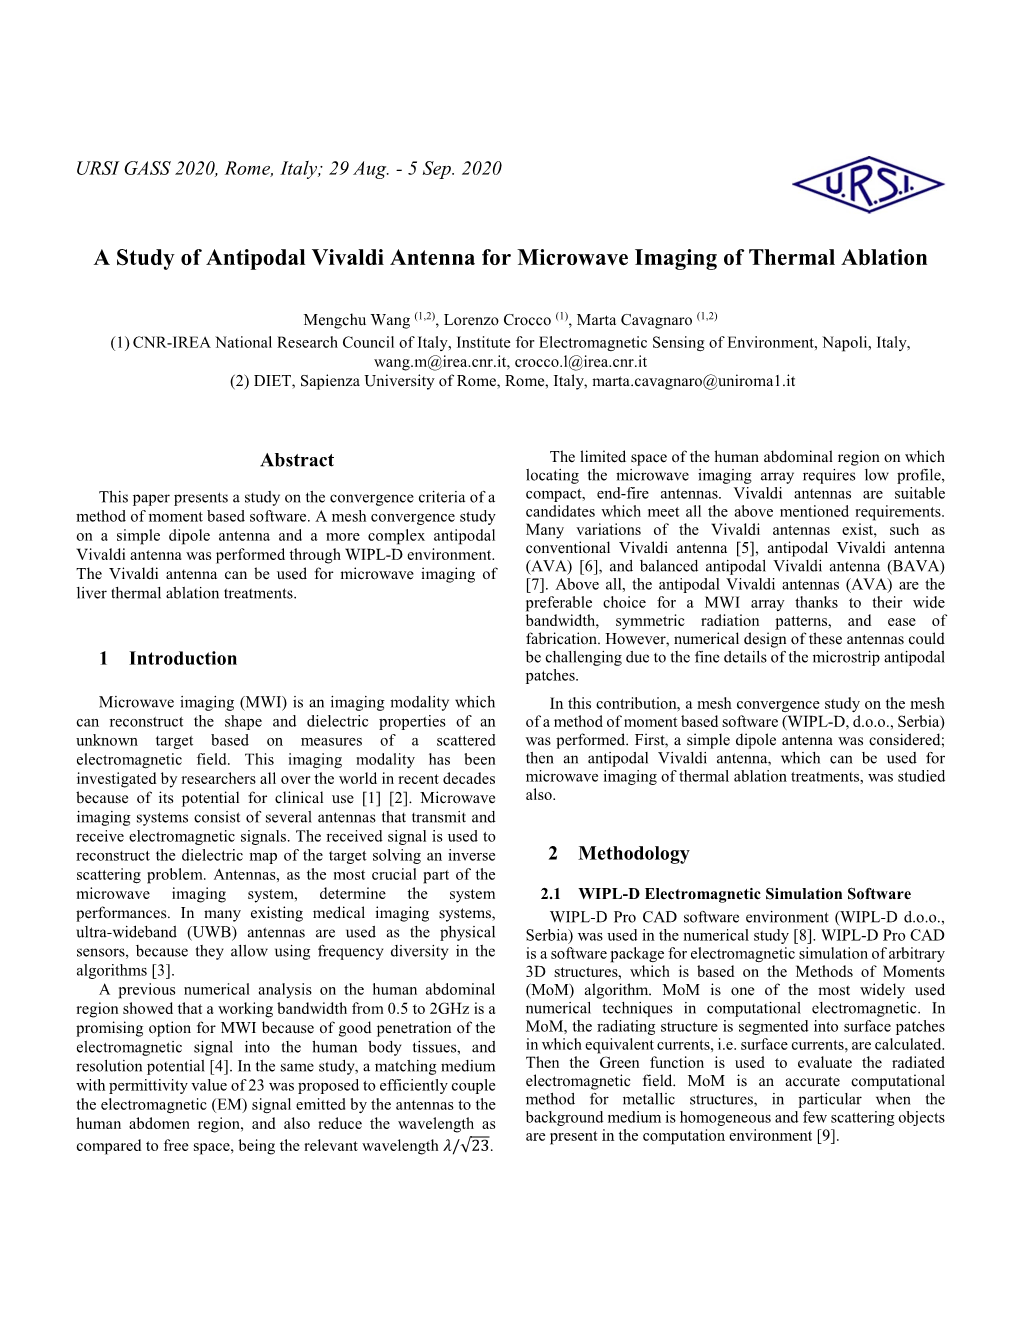 A Study of Antipodal Vivaldi Antenna for Microwave Imaging of Thermal Ablation